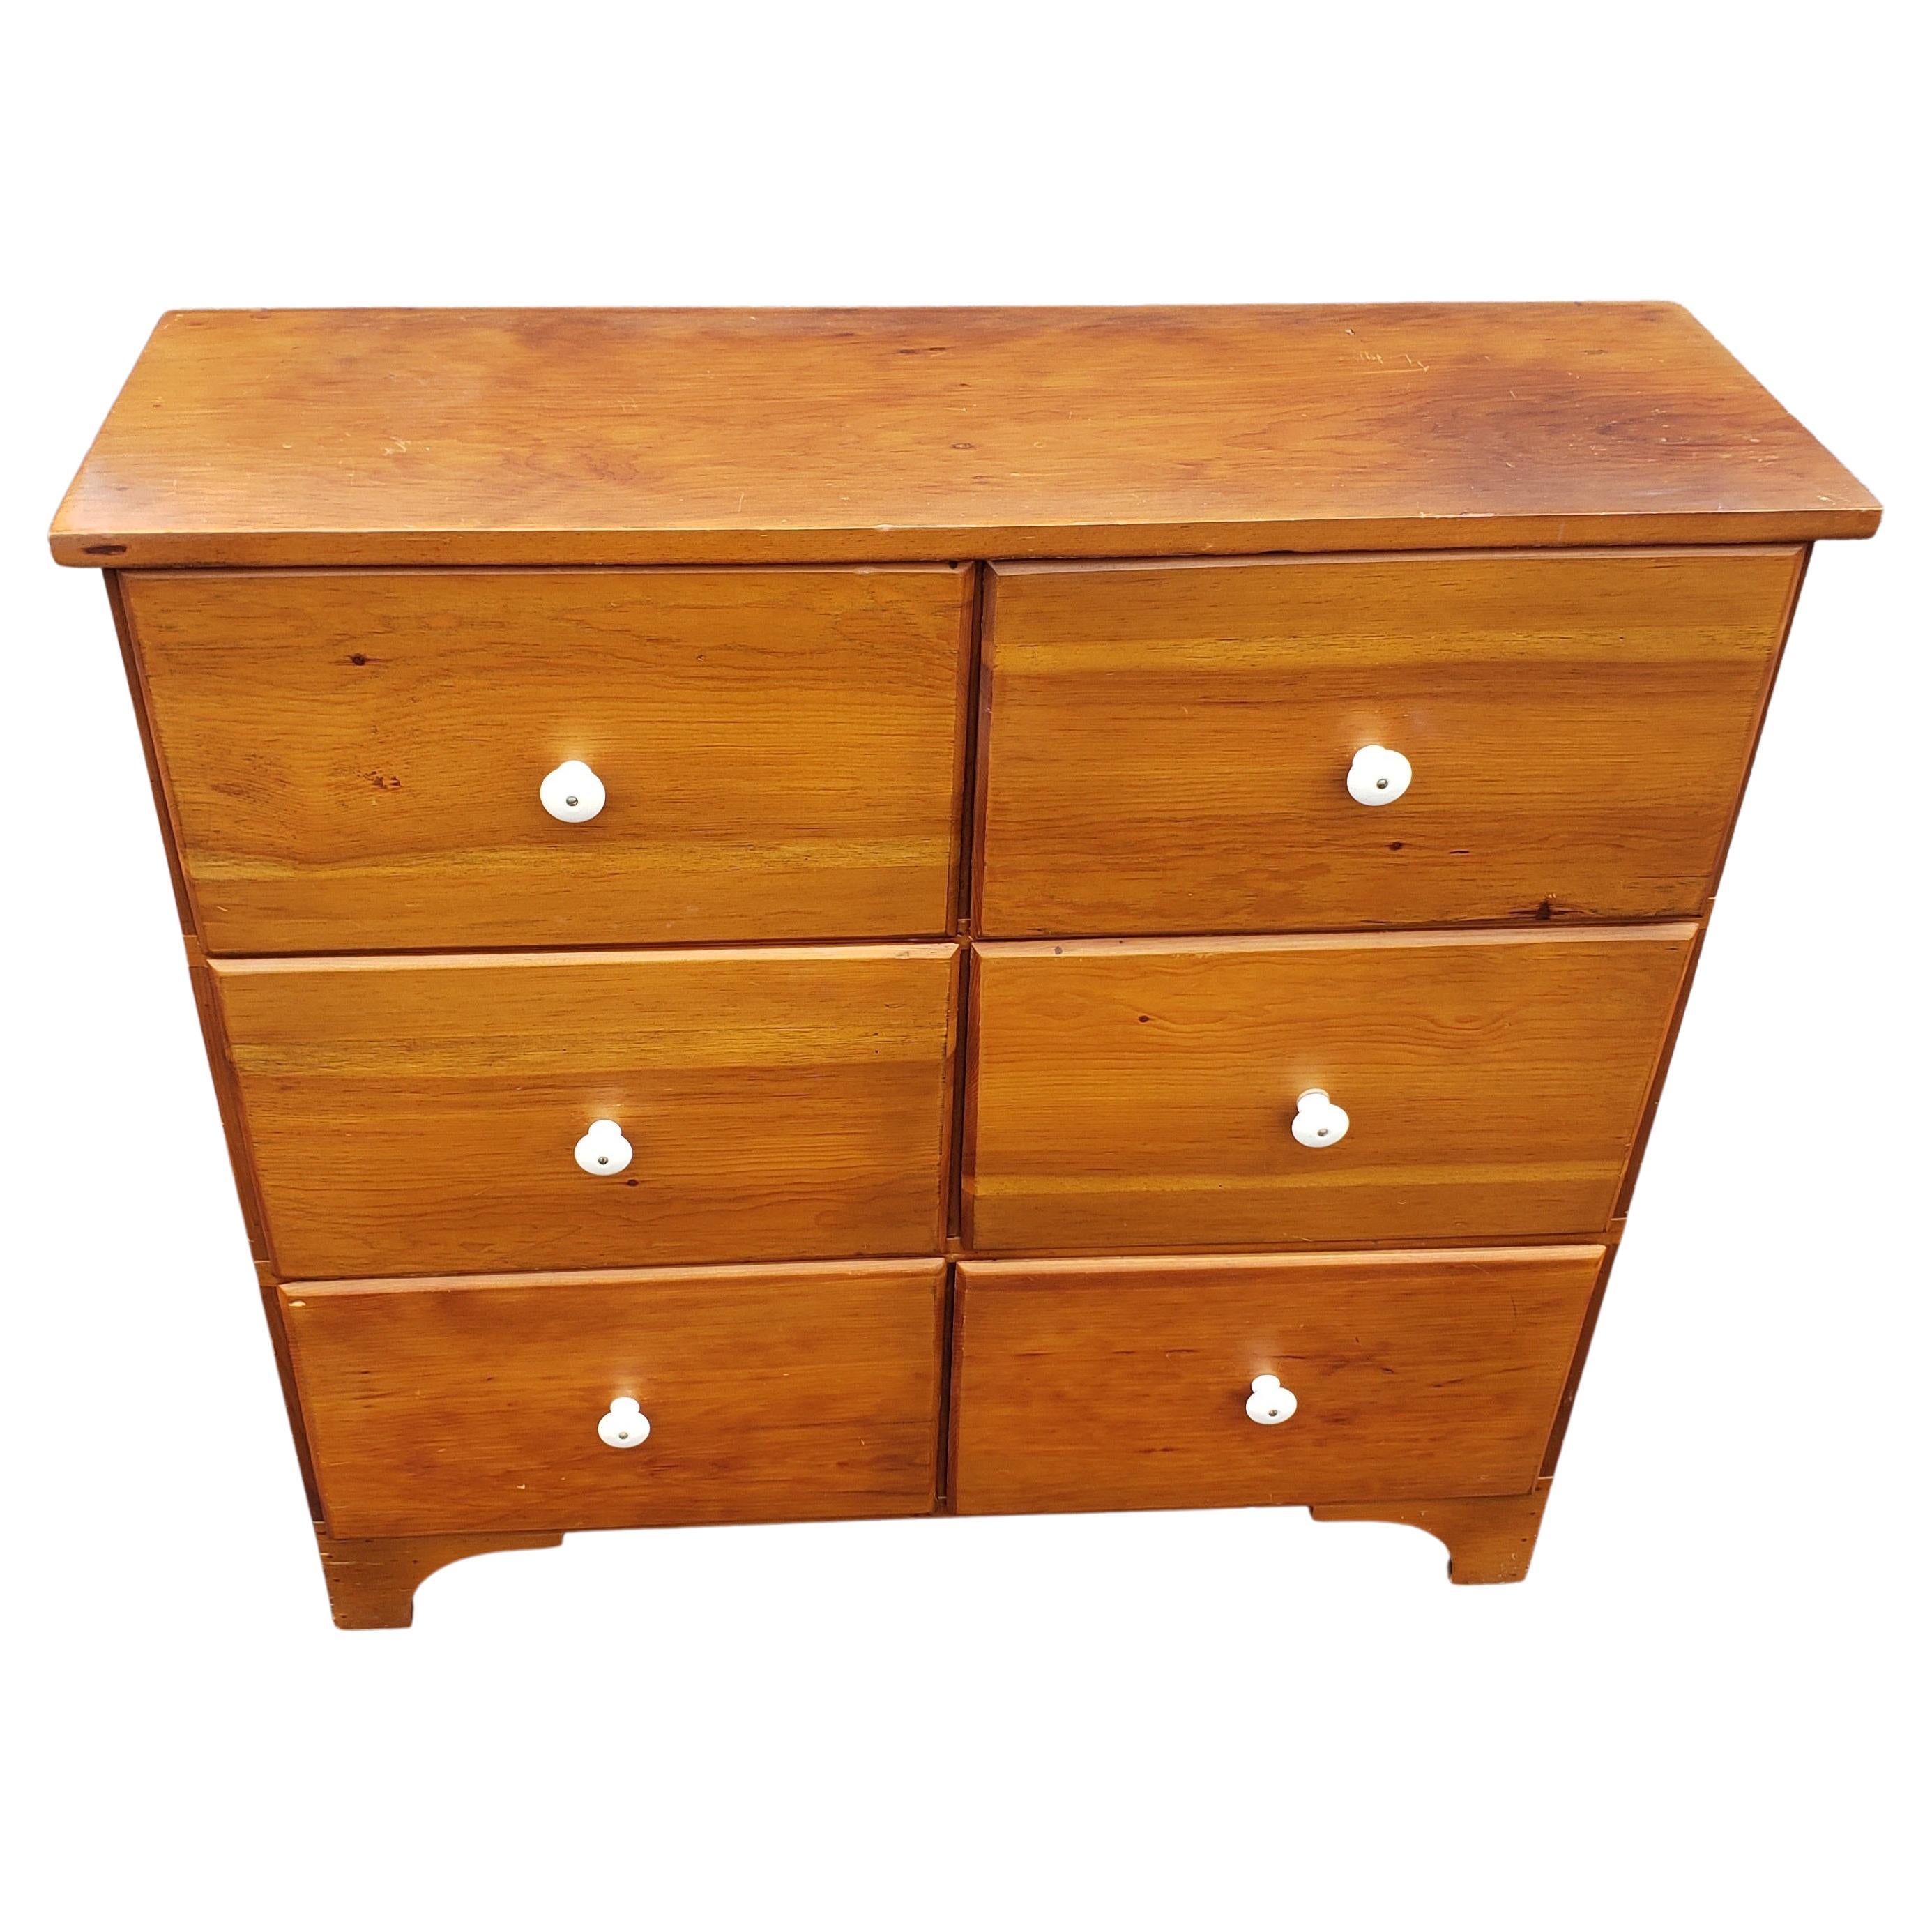 An Early 20th solid pine 6-drawer american colonial style side cabinet chest of drawers. Flawlessly working drawers.
 